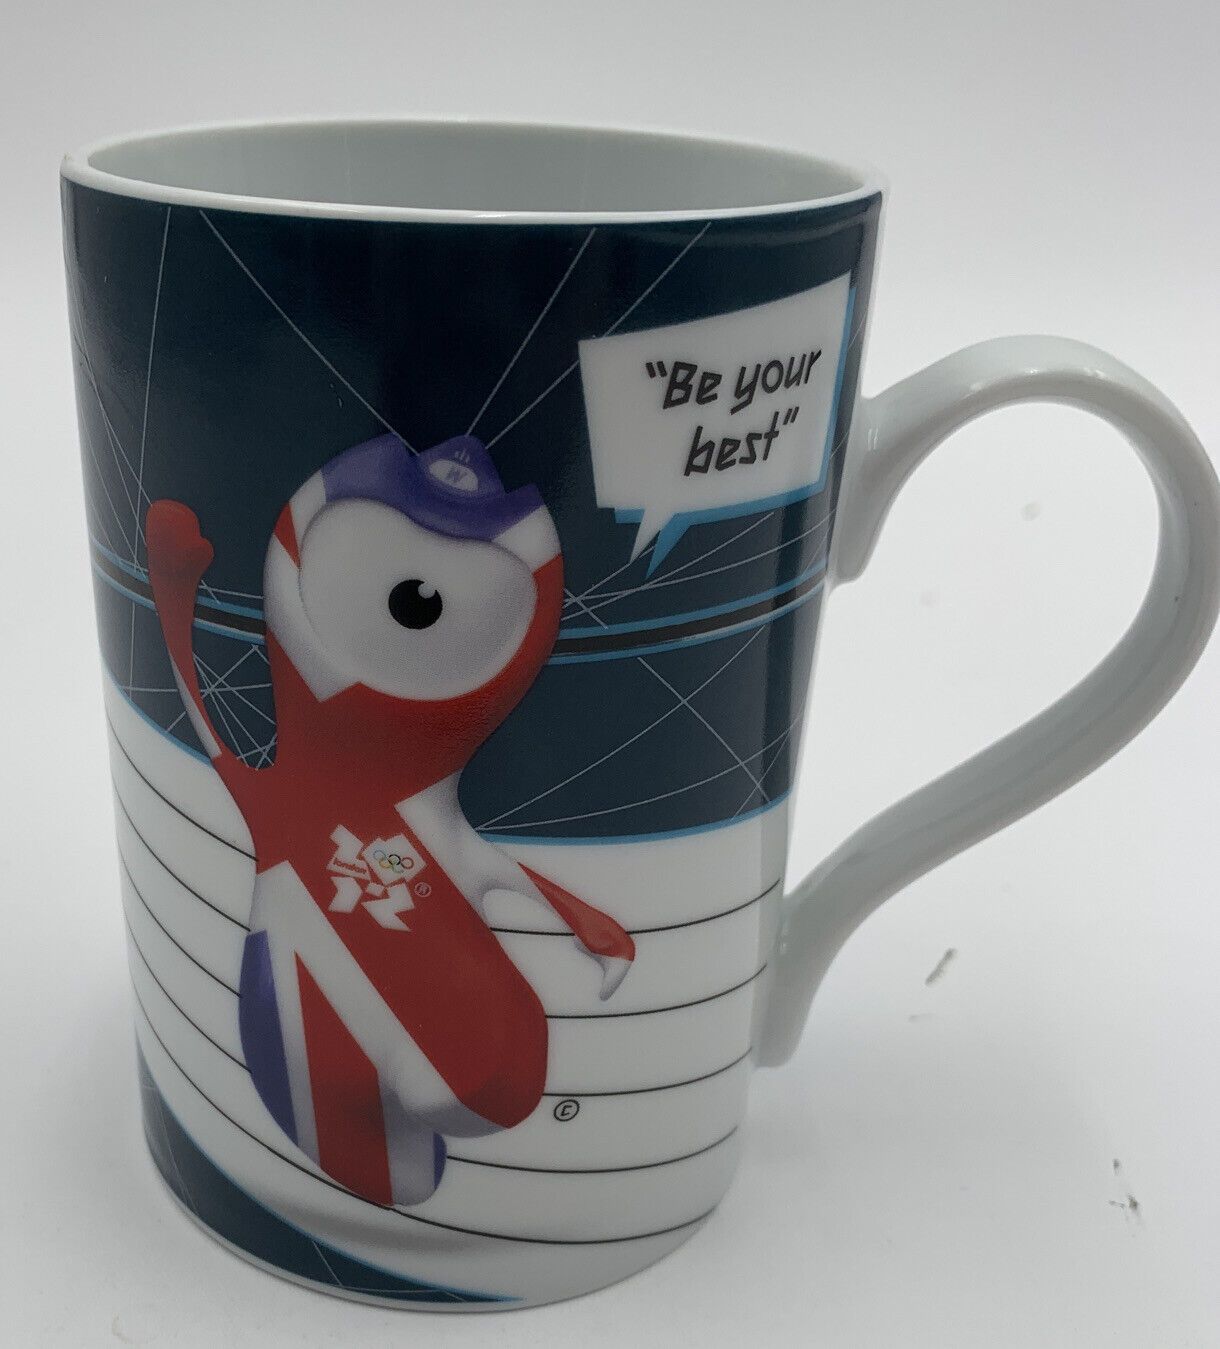 Official 2012 London Olympic Games Cup / Porcelain Mascot Coffee Mug